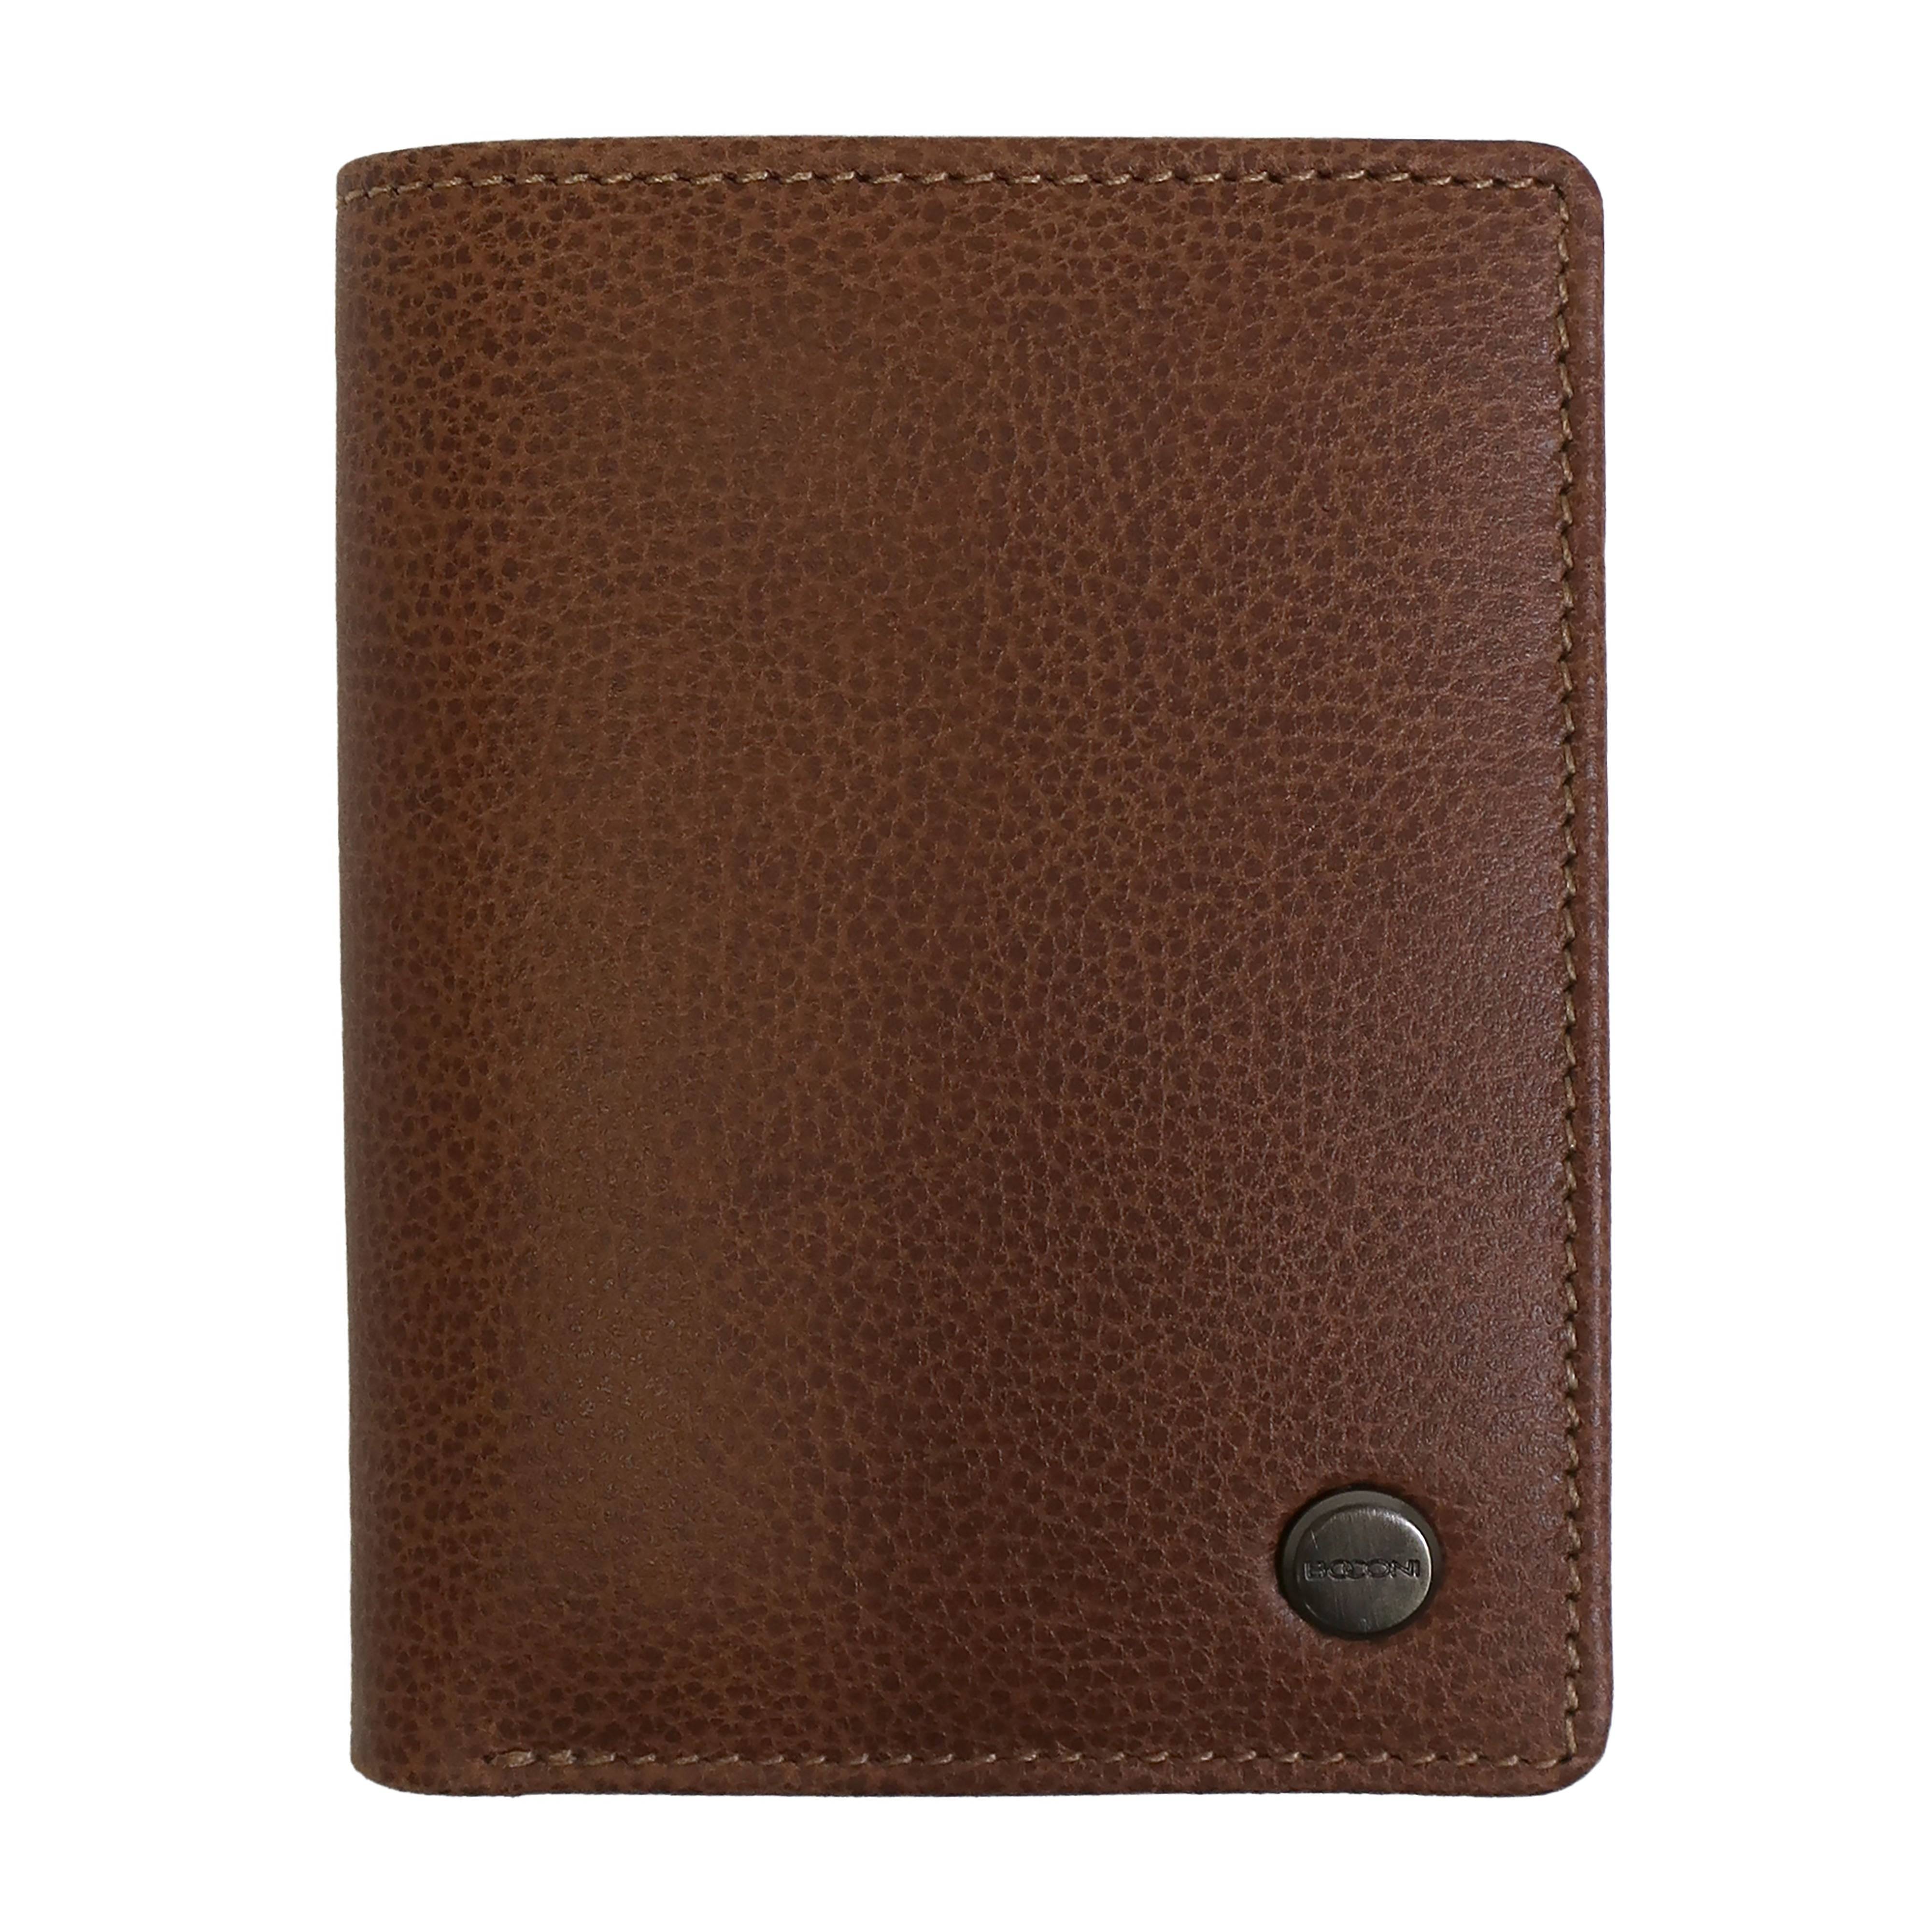 Kenneth Compact Leather Bifold Wallet